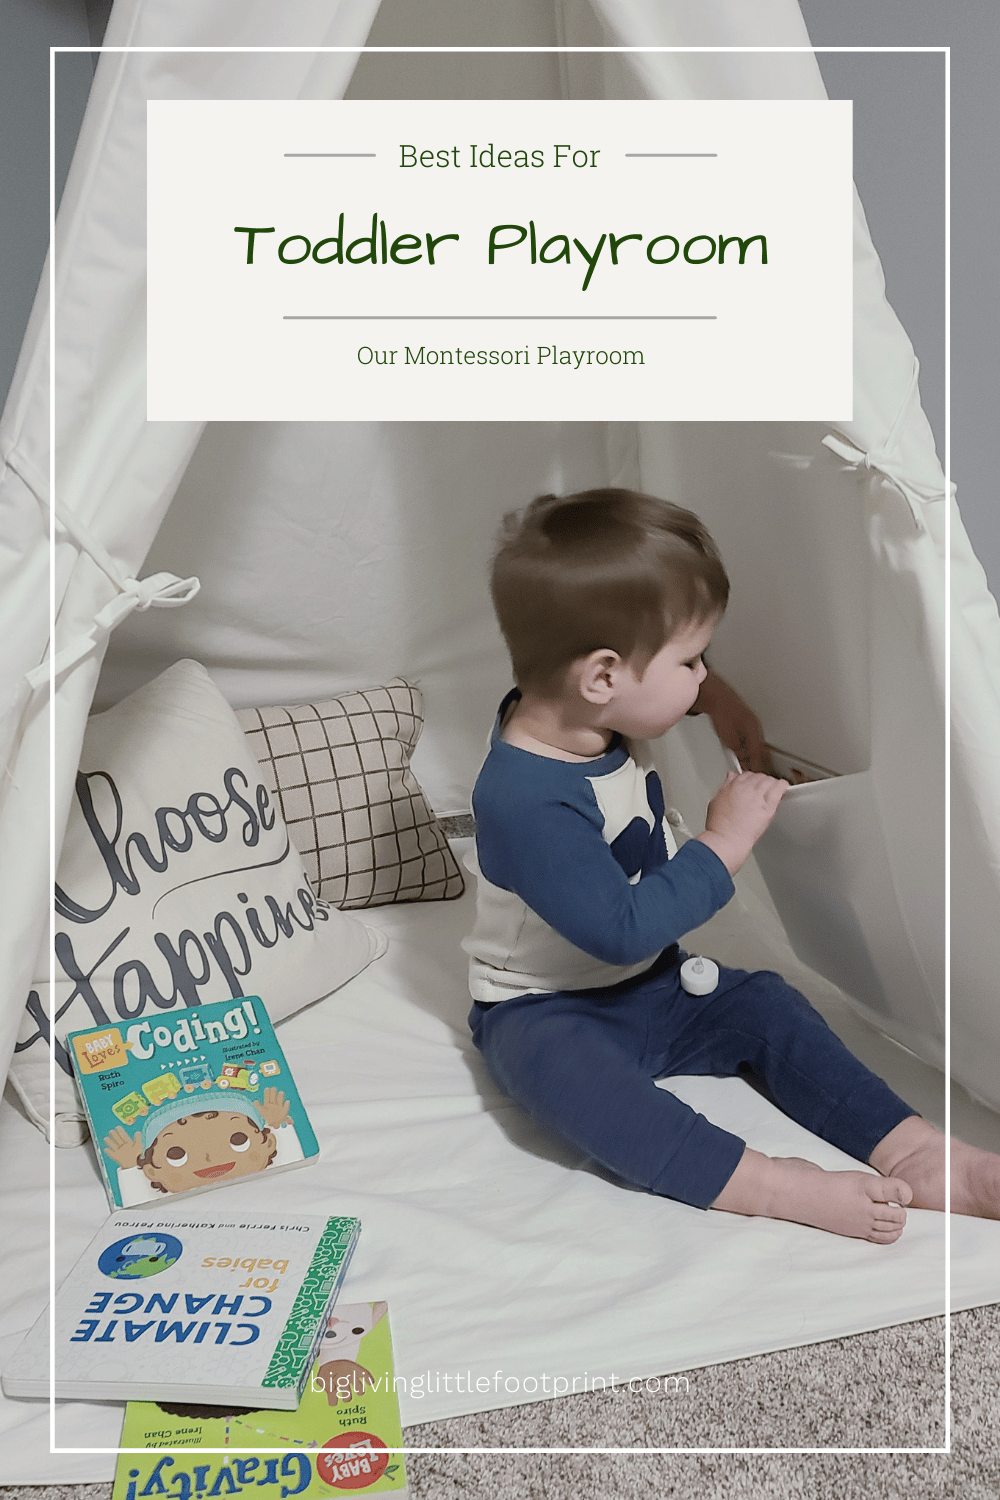 Best Ideas for Toddler Playroom: Our Montessori Playroom